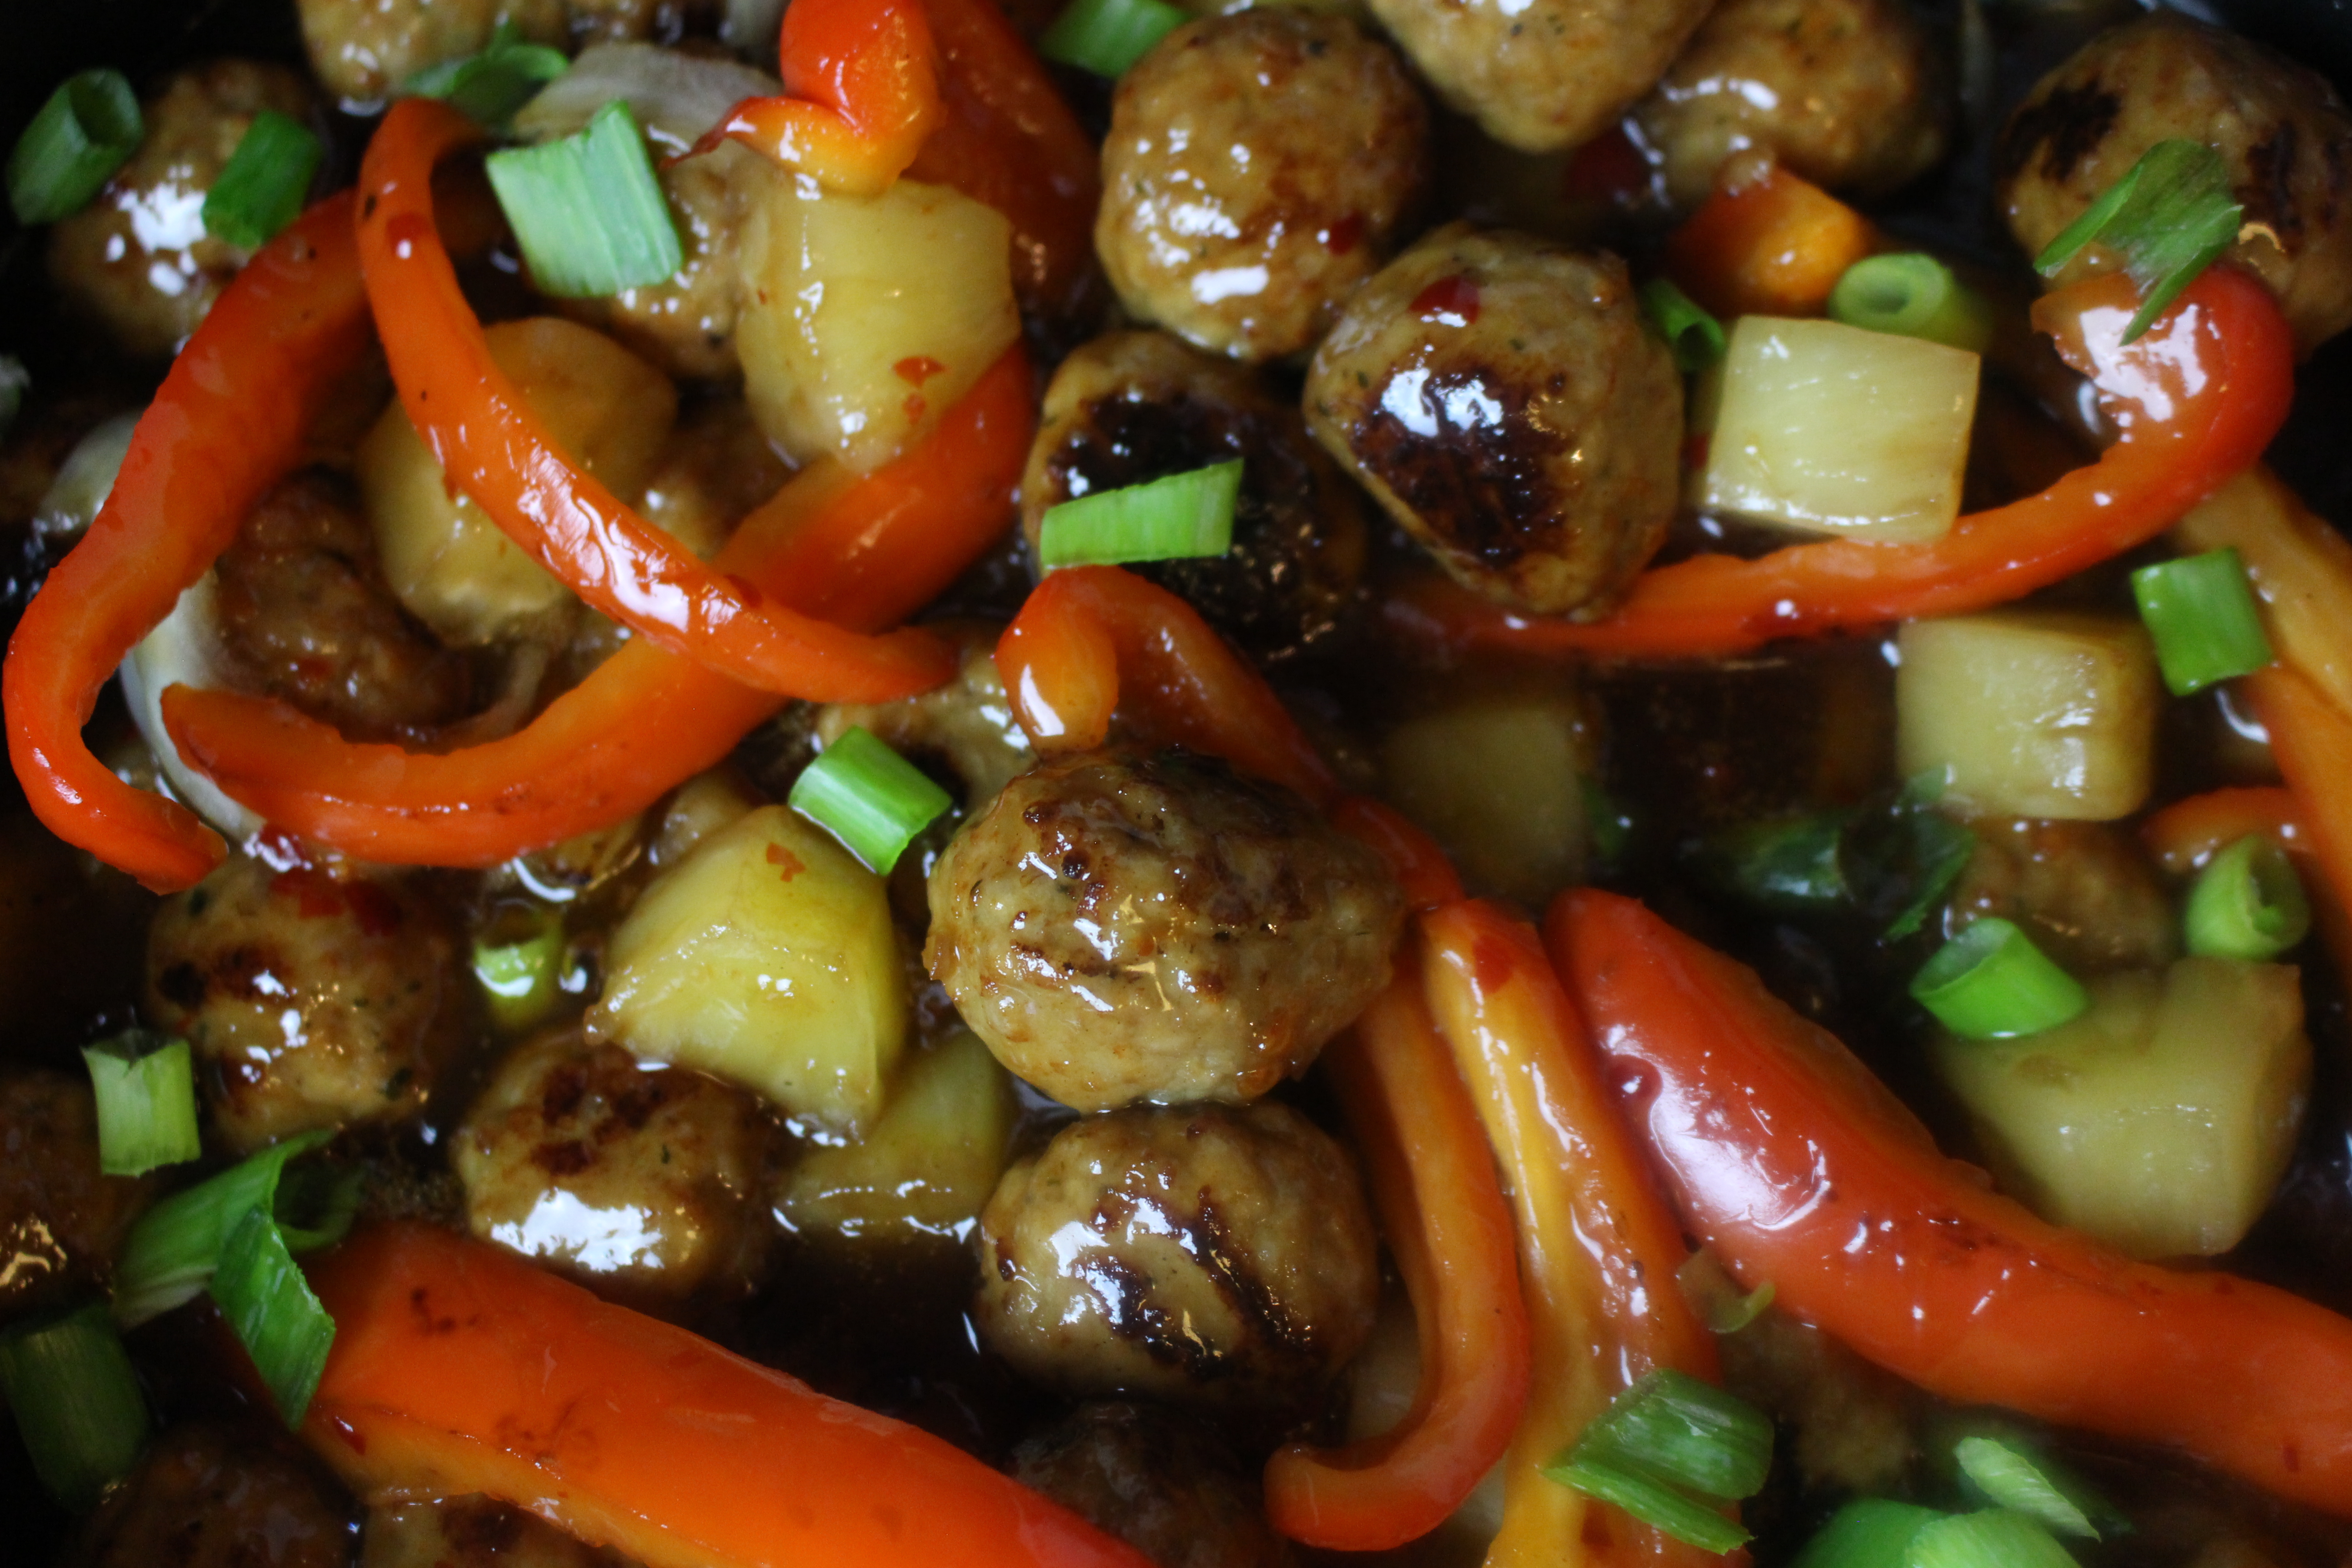 These sweet and sour meatballs are mixed with delicious sweet peppers and pineapple pieces